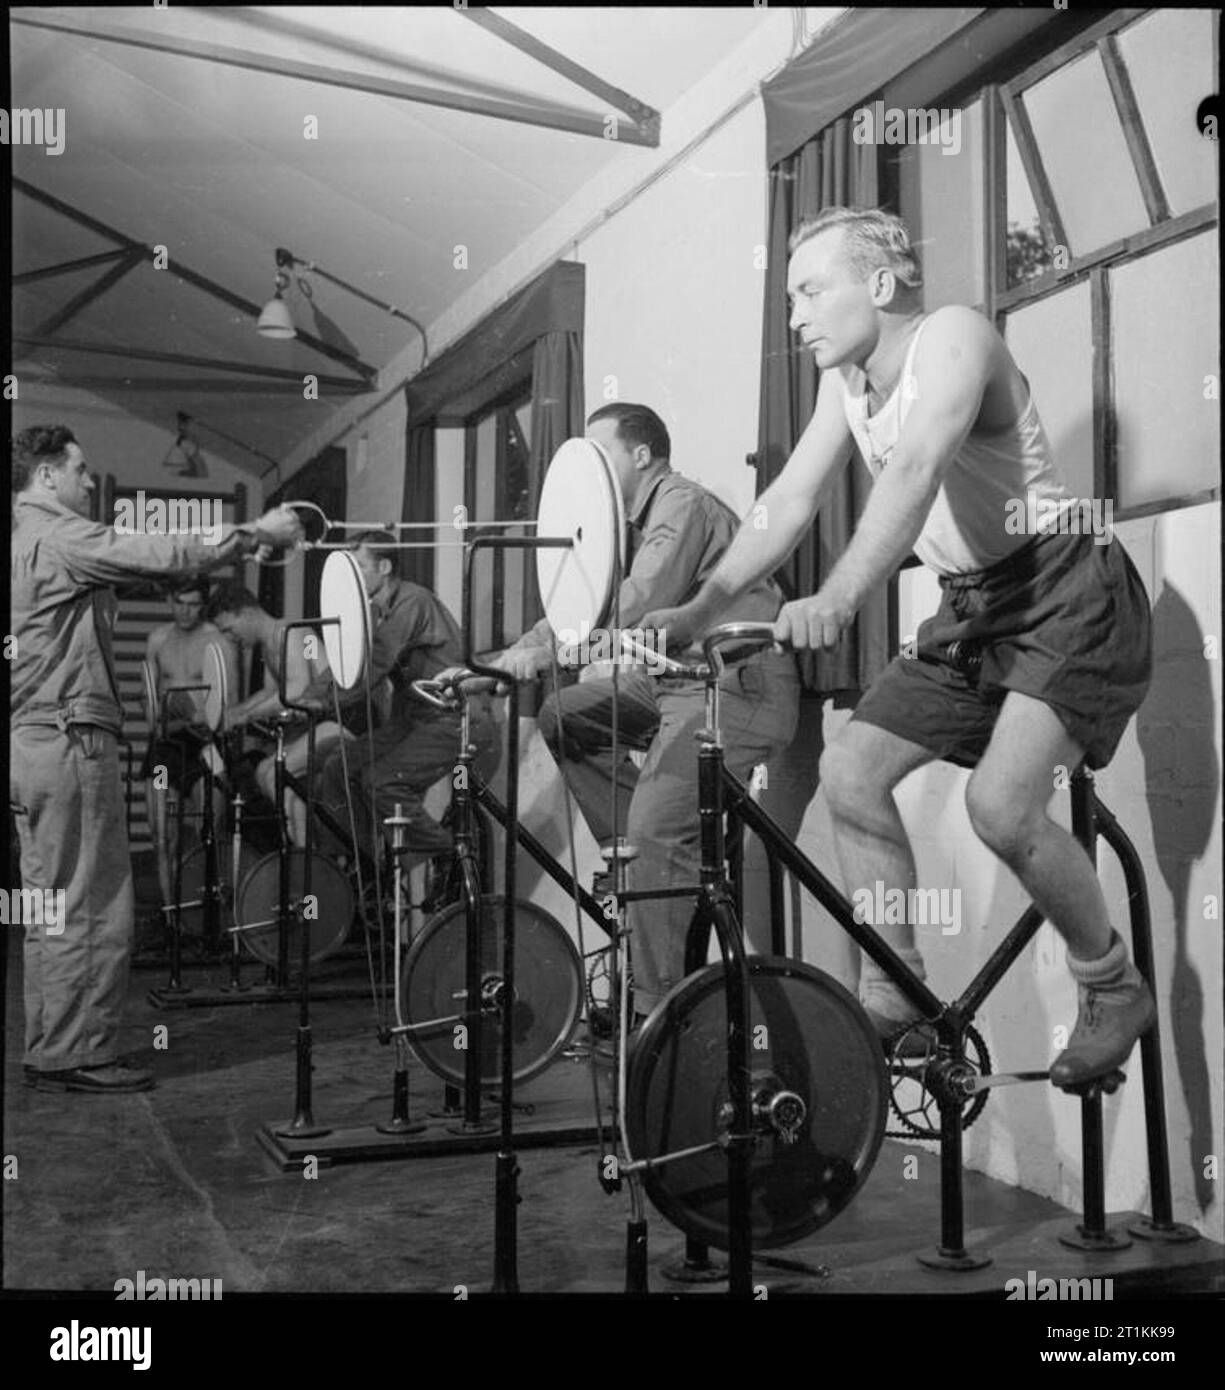 First US Army Rehabilitation Centre- Recuperation and Training at 8th Convalescent Hospital, Stoneleigh Park, Kenilworth, Warwickshire, UK, 1943 Pfc Verble Billings (of Route 1, Covington, Tennessee) rides an exercise bicycle in the remedial gymnasium at 8th Convalescent Hospital at Stoneleigh Park. Billings was with the field artillery and was wounded by shrapnel in the back of the knee near Tunis. Before the war, Billings worked on his father's farm in Covington. Stock Photo